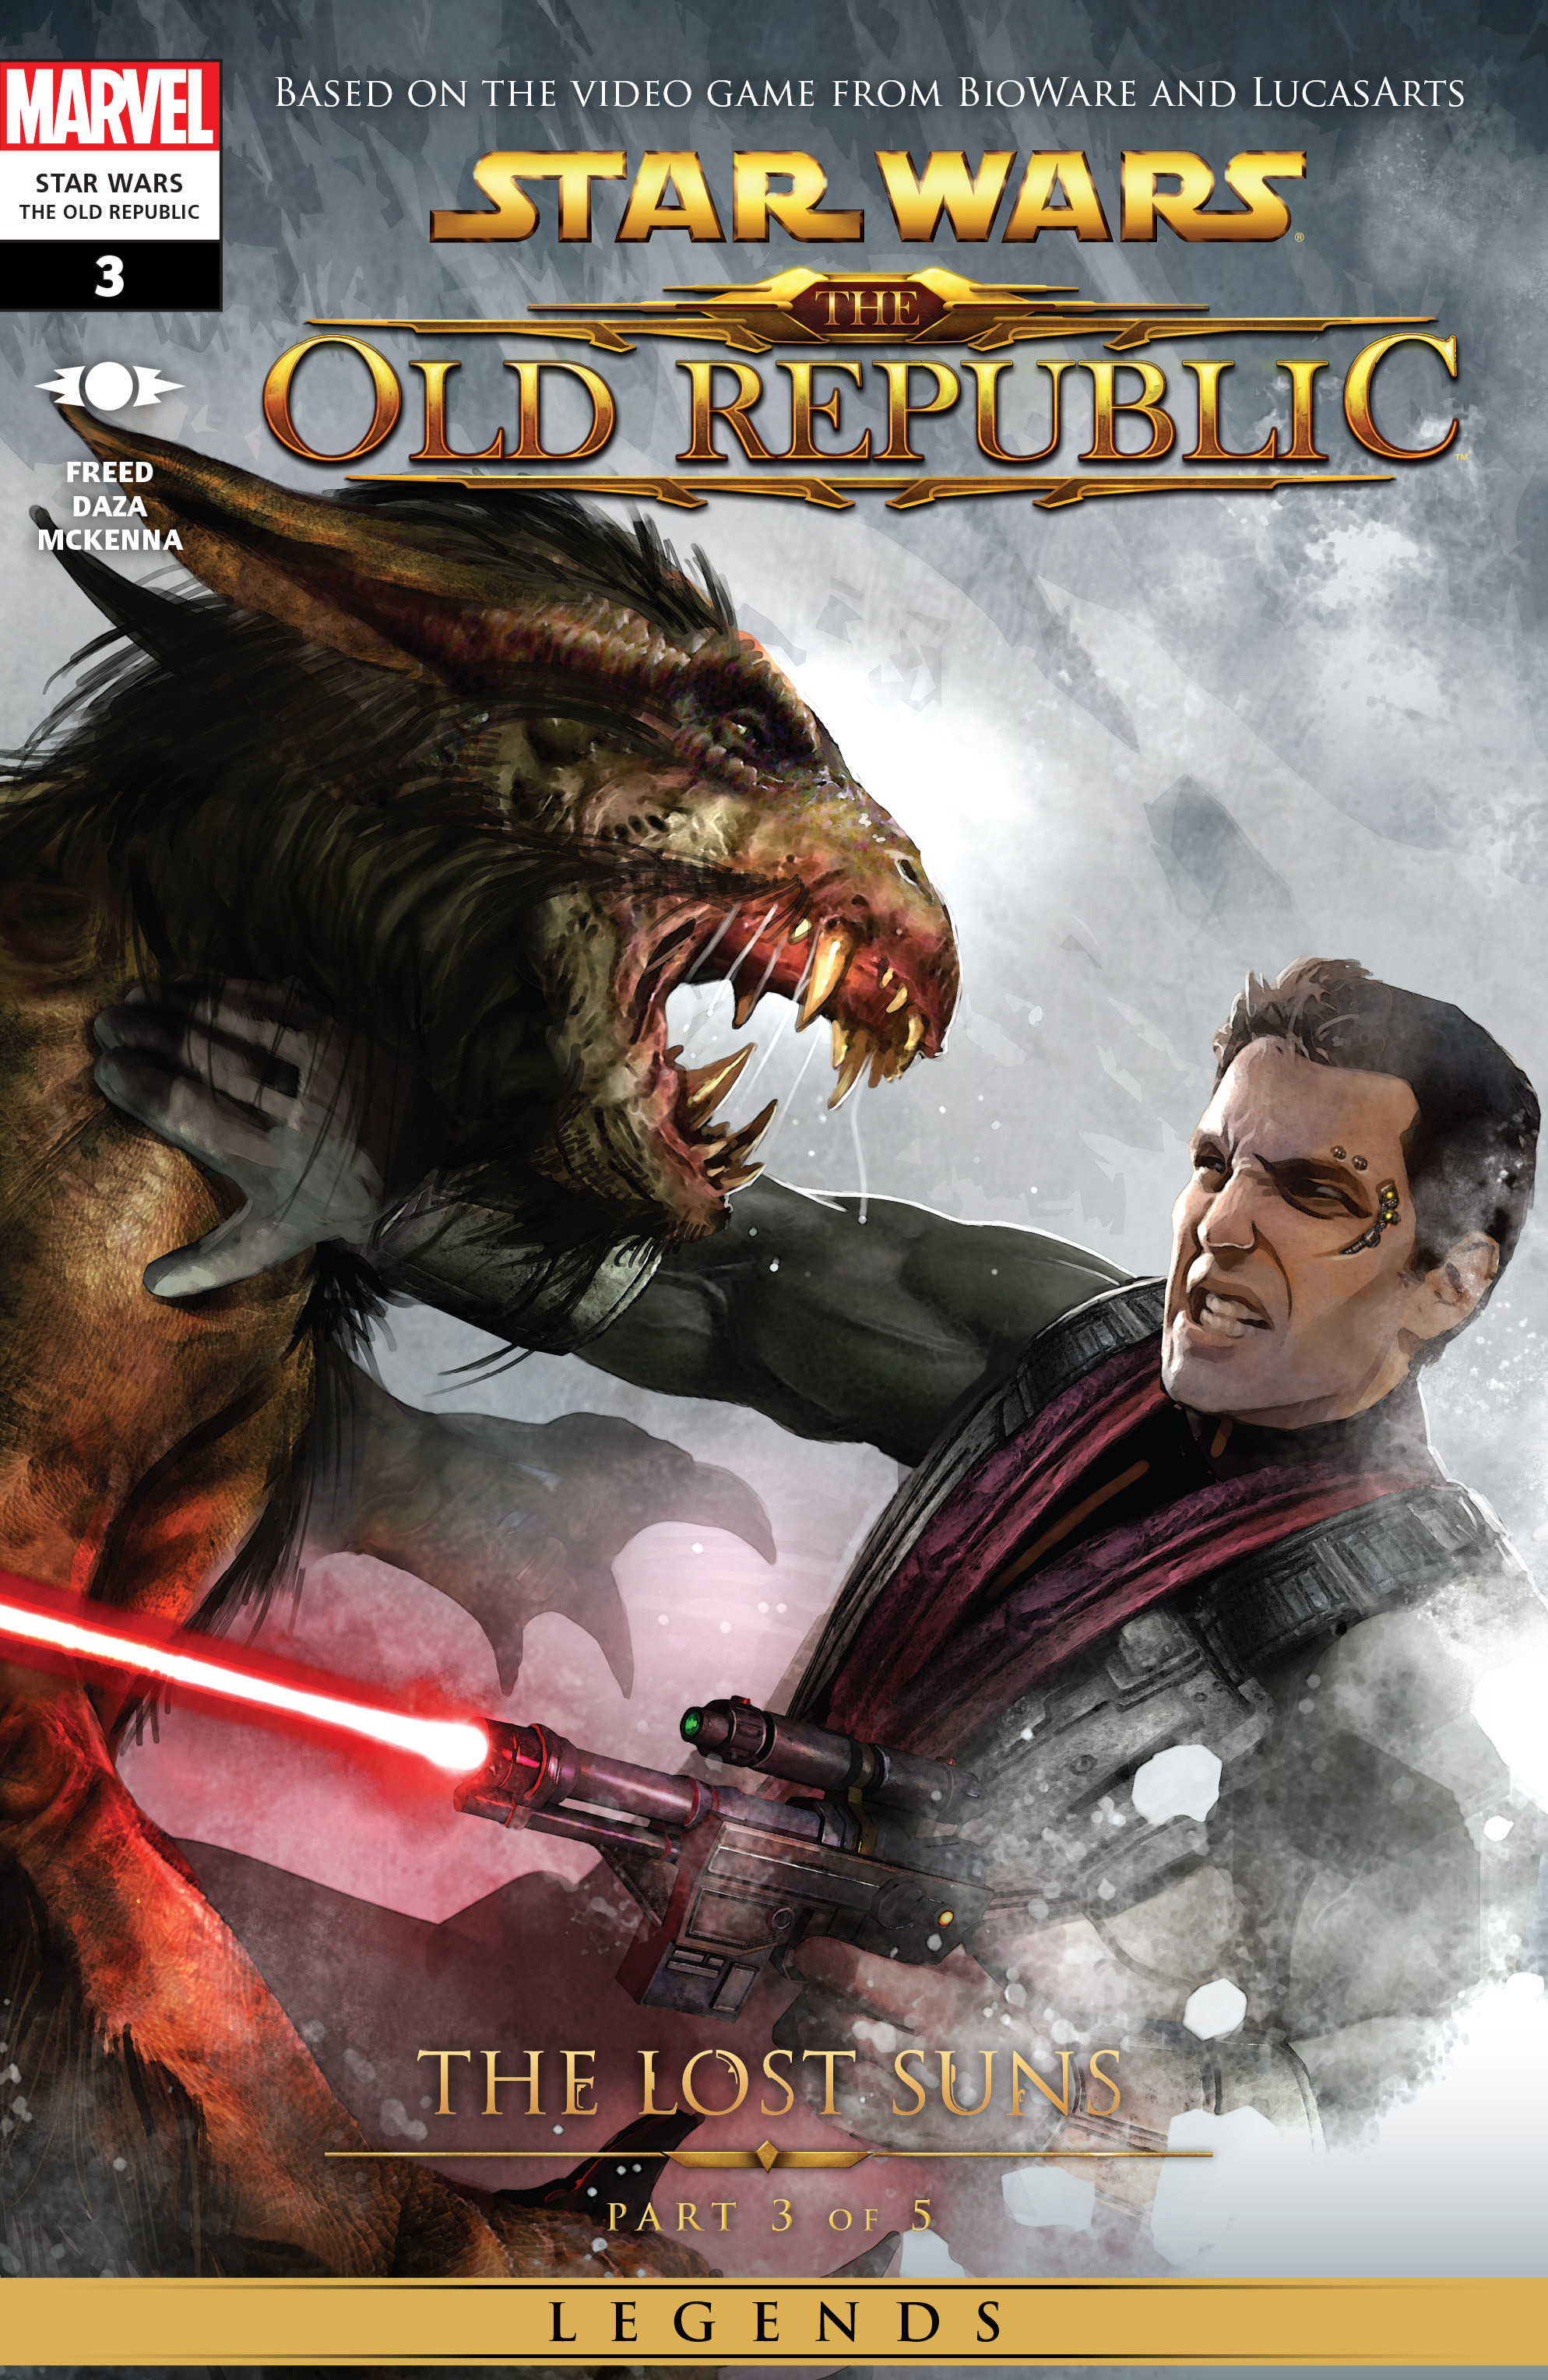 Star Wars – The Old Republic – The Lost Suns 003 (Marvel Edition) (2015) (Digital) 1